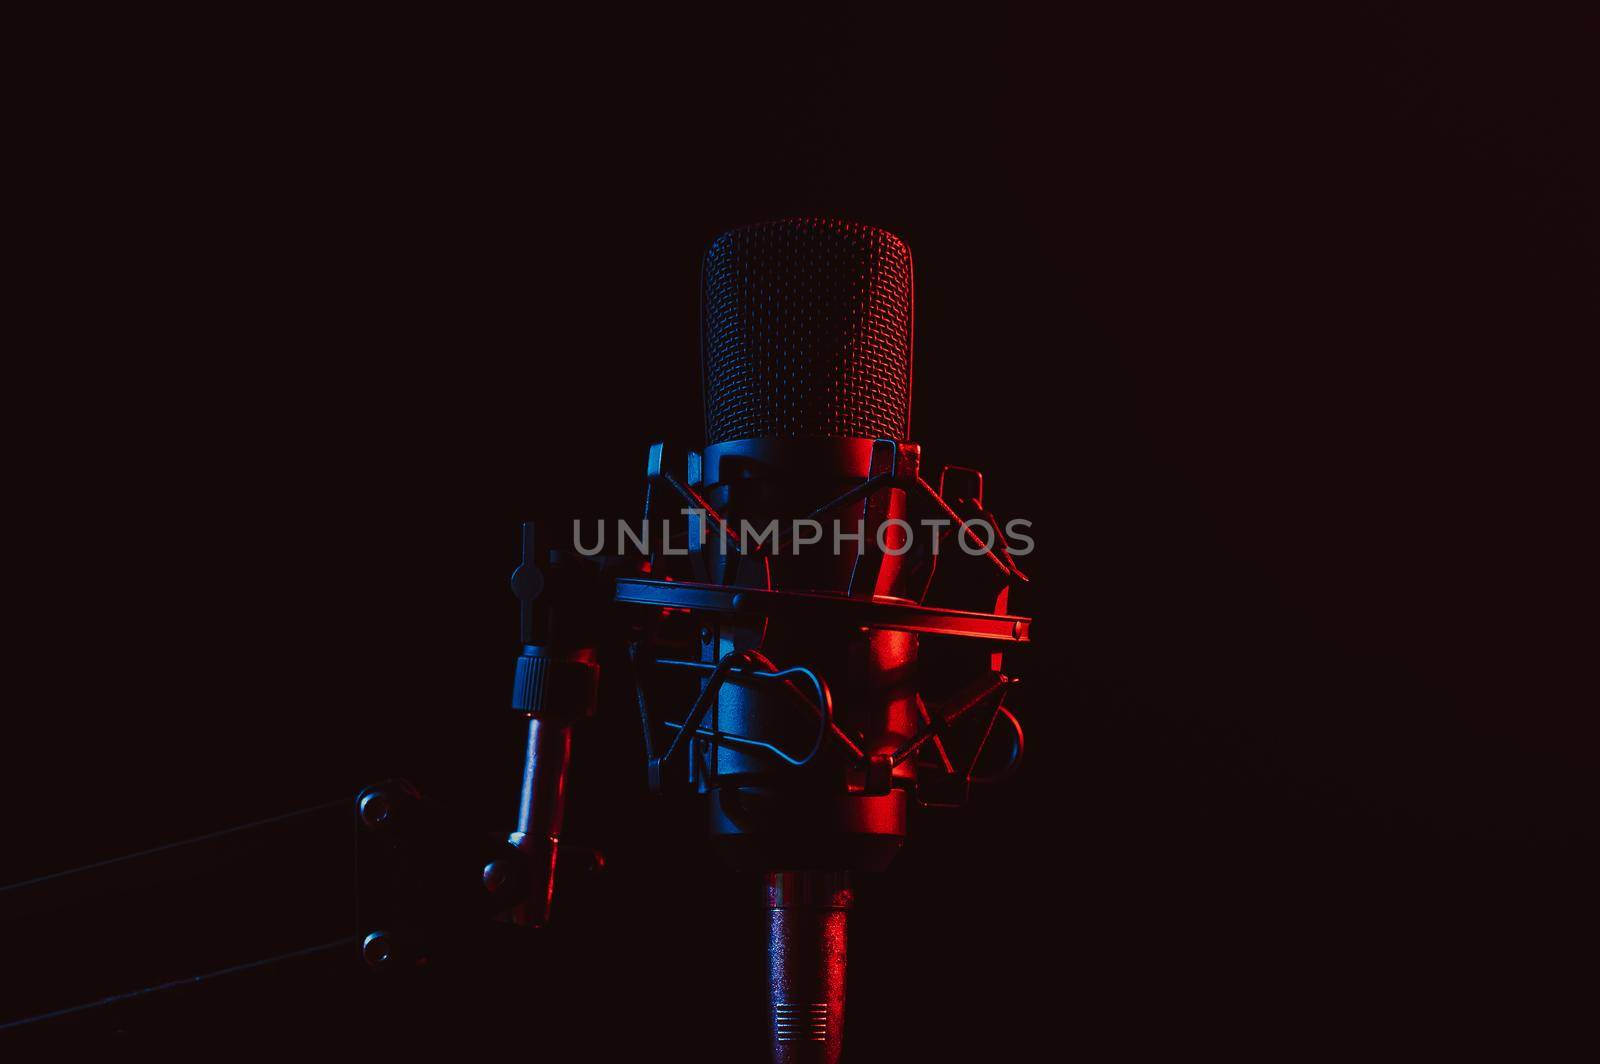 Professional microphone in pink smoke on a black background